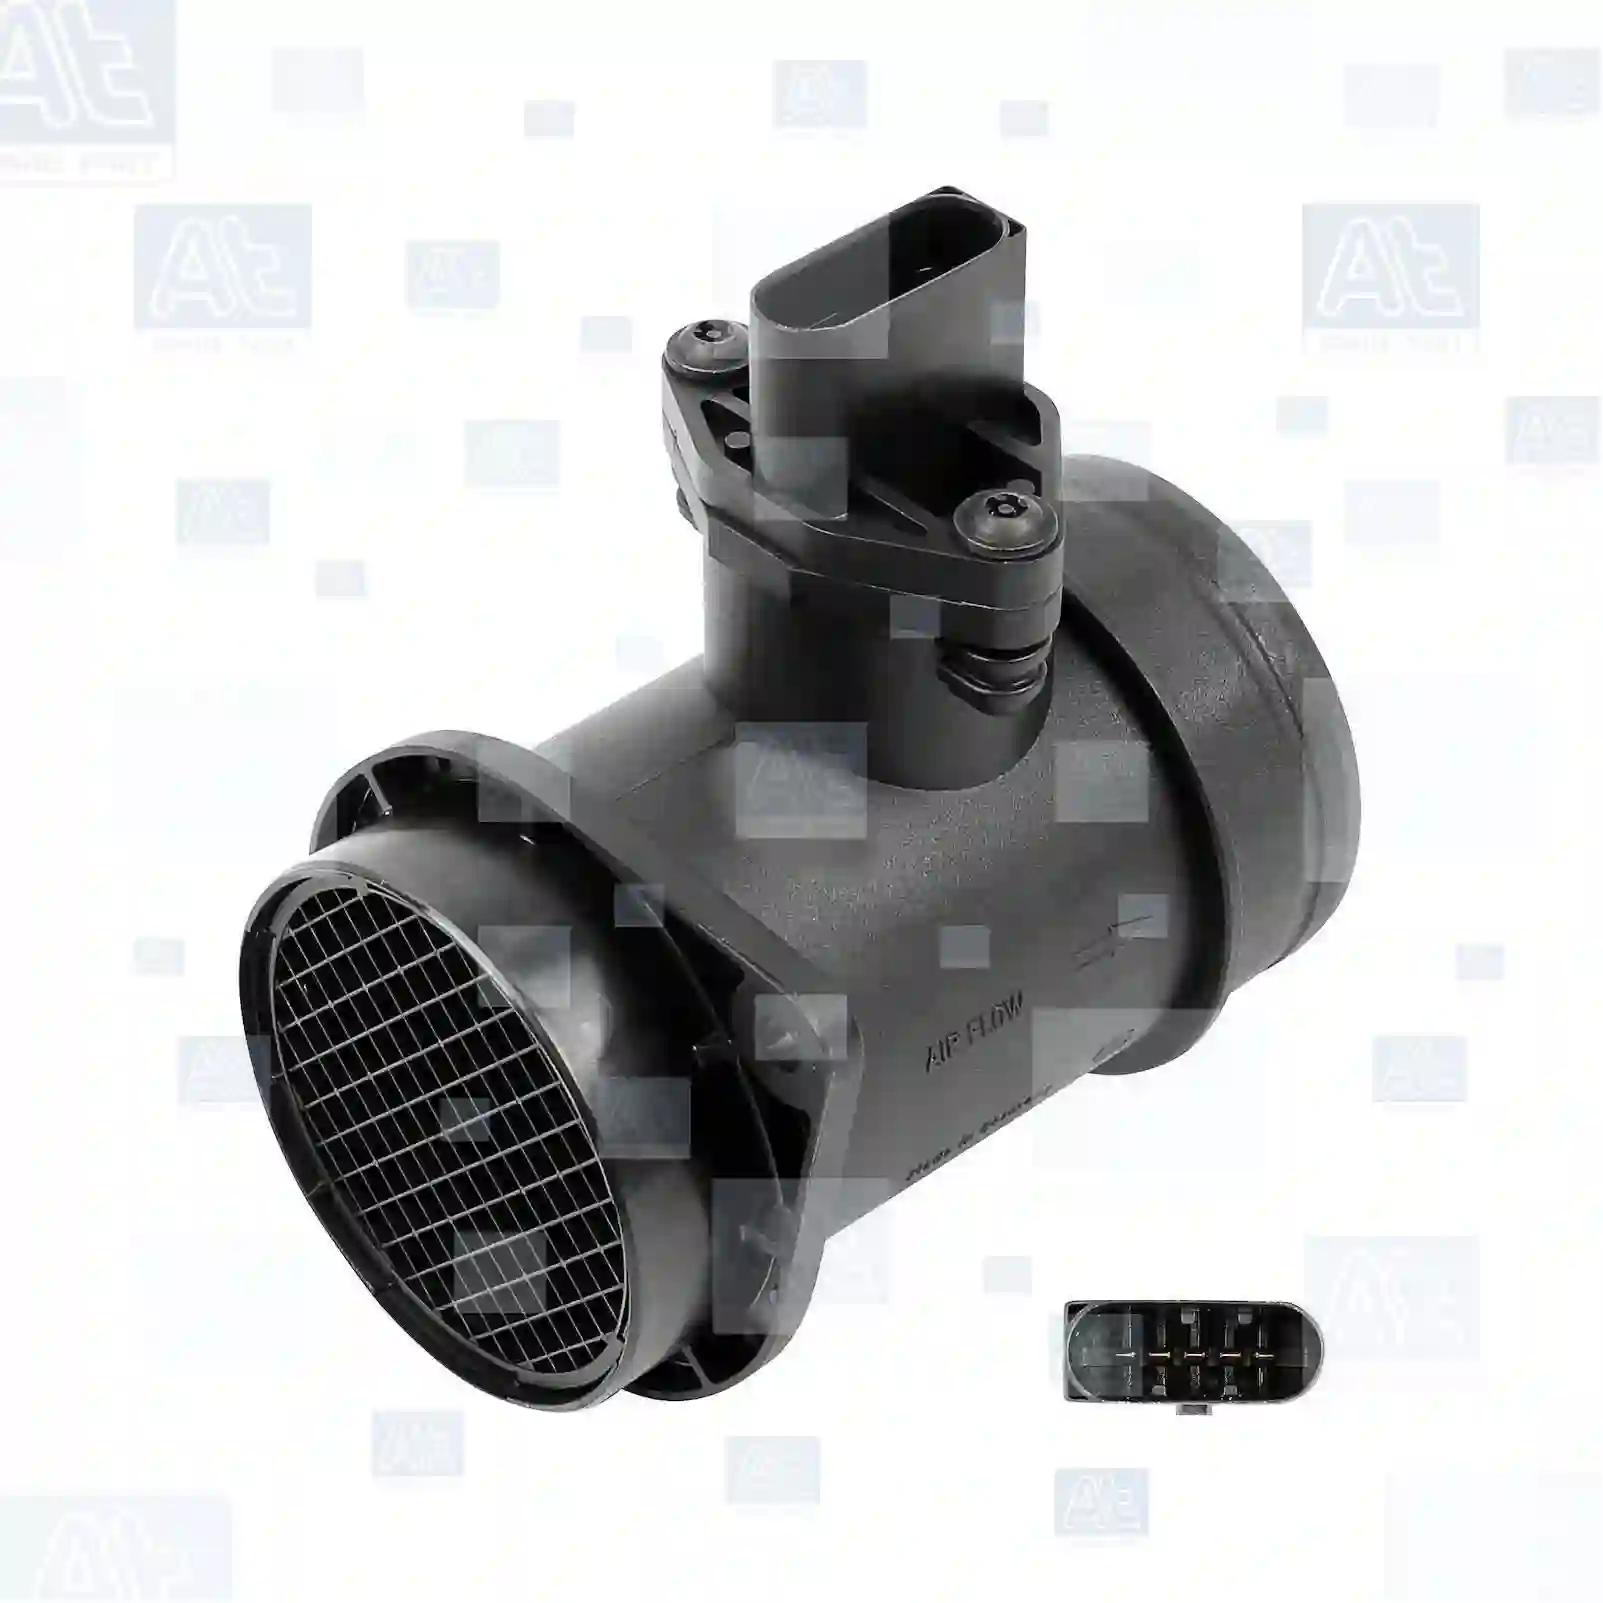 Air mass sensor, complete, at no 77706557, oem no: 028906461, 038906461C, 059906461B, 06A906461, 06A906461G, 06A906461L, 06A906461N, 07C906461, 07D906461, 1051396, 1344951, 1384275, 1428448, 95560612300, 028906461, 038906461C, 038906461D, 059906461B, 06A906461, 06A906461G, 06A906461L, 06A906461N, 07C906461, 07D906461, 028906461, 038906461C, 059906461B, 06A906461, 06A906461G, 06A906461L, 06A906461N, 07C906461, 07D906461, 028906461, 028906461X, 038906461C, 038906461D, 059906461B, 059906461BX, 06A906461, 06A906461G, 06A906461GX, 06A906461L, 06A906461LX, 06A906461N, 06A906461NX, 06A906461X, 07C906461, 07D906461 At Spare Part | Engine, Accelerator Pedal, Camshaft, Connecting Rod, Crankcase, Crankshaft, Cylinder Head, Engine Suspension Mountings, Exhaust Manifold, Exhaust Gas Recirculation, Filter Kits, Flywheel Housing, General Overhaul Kits, Engine, Intake Manifold, Oil Cleaner, Oil Cooler, Oil Filter, Oil Pump, Oil Sump, Piston & Liner, Sensor & Switch, Timing Case, Turbocharger, Cooling System, Belt Tensioner, Coolant Filter, Coolant Pipe, Corrosion Prevention Agent, Drive, Expansion Tank, Fan, Intercooler, Monitors & Gauges, Radiator, Thermostat, V-Belt / Timing belt, Water Pump, Fuel System, Electronical Injector Unit, Feed Pump, Fuel Filter, cpl., Fuel Gauge Sender,  Fuel Line, Fuel Pump, Fuel Tank, Injection Line Kit, Injection Pump, Exhaust System, Clutch & Pedal, Gearbox, Propeller Shaft, Axles, Brake System, Hubs & Wheels, Suspension, Leaf Spring, Universal Parts / Accessories, Steering, Electrical System, Cabin Air mass sensor, complete, at no 77706557, oem no: 028906461, 038906461C, 059906461B, 06A906461, 06A906461G, 06A906461L, 06A906461N, 07C906461, 07D906461, 1051396, 1344951, 1384275, 1428448, 95560612300, 028906461, 038906461C, 038906461D, 059906461B, 06A906461, 06A906461G, 06A906461L, 06A906461N, 07C906461, 07D906461, 028906461, 038906461C, 059906461B, 06A906461, 06A906461G, 06A906461L, 06A906461N, 07C906461, 07D906461, 028906461, 028906461X, 038906461C, 038906461D, 059906461B, 059906461BX, 06A906461, 06A906461G, 06A906461GX, 06A906461L, 06A906461LX, 06A906461N, 06A906461NX, 06A906461X, 07C906461, 07D906461 At Spare Part | Engine, Accelerator Pedal, Camshaft, Connecting Rod, Crankcase, Crankshaft, Cylinder Head, Engine Suspension Mountings, Exhaust Manifold, Exhaust Gas Recirculation, Filter Kits, Flywheel Housing, General Overhaul Kits, Engine, Intake Manifold, Oil Cleaner, Oil Cooler, Oil Filter, Oil Pump, Oil Sump, Piston & Liner, Sensor & Switch, Timing Case, Turbocharger, Cooling System, Belt Tensioner, Coolant Filter, Coolant Pipe, Corrosion Prevention Agent, Drive, Expansion Tank, Fan, Intercooler, Monitors & Gauges, Radiator, Thermostat, V-Belt / Timing belt, Water Pump, Fuel System, Electronical Injector Unit, Feed Pump, Fuel Filter, cpl., Fuel Gauge Sender,  Fuel Line, Fuel Pump, Fuel Tank, Injection Line Kit, Injection Pump, Exhaust System, Clutch & Pedal, Gearbox, Propeller Shaft, Axles, Brake System, Hubs & Wheels, Suspension, Leaf Spring, Universal Parts / Accessories, Steering, Electrical System, Cabin